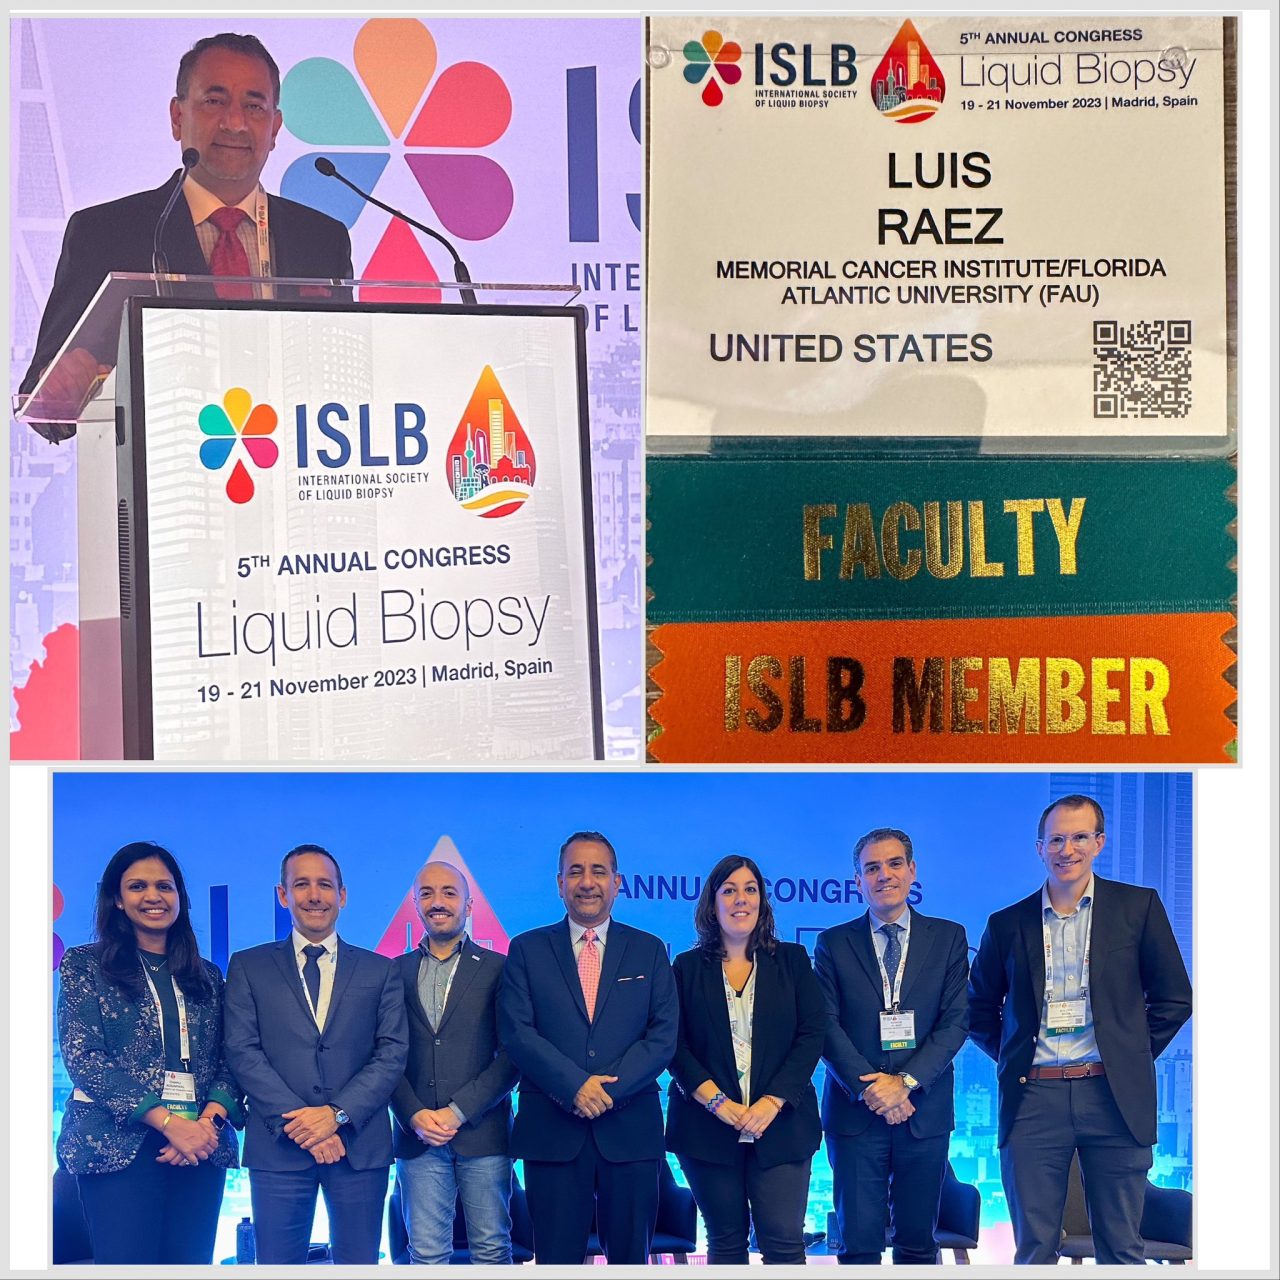 Luis E. Raez: The ISLB23 a total success for our young society with more than 400 people from >20 countries attending!!